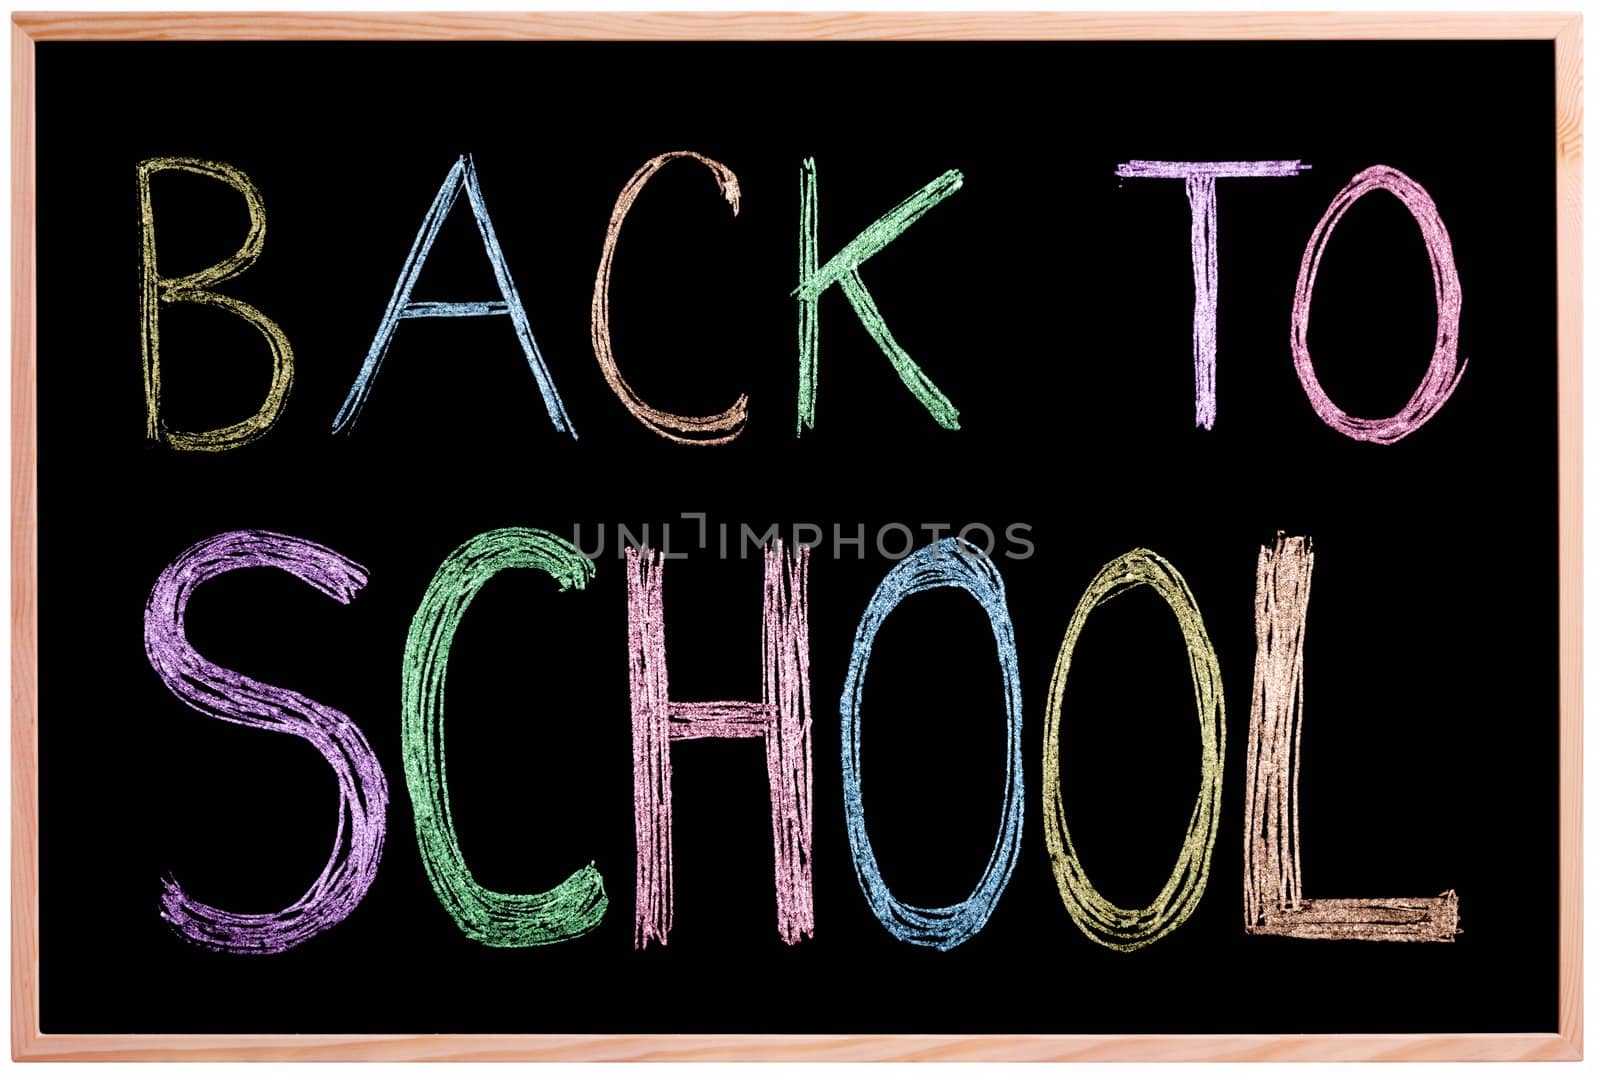 Back to School! Chalkboard / blackboard with back to school written in colors with chalk on the board. Image is Isolated.